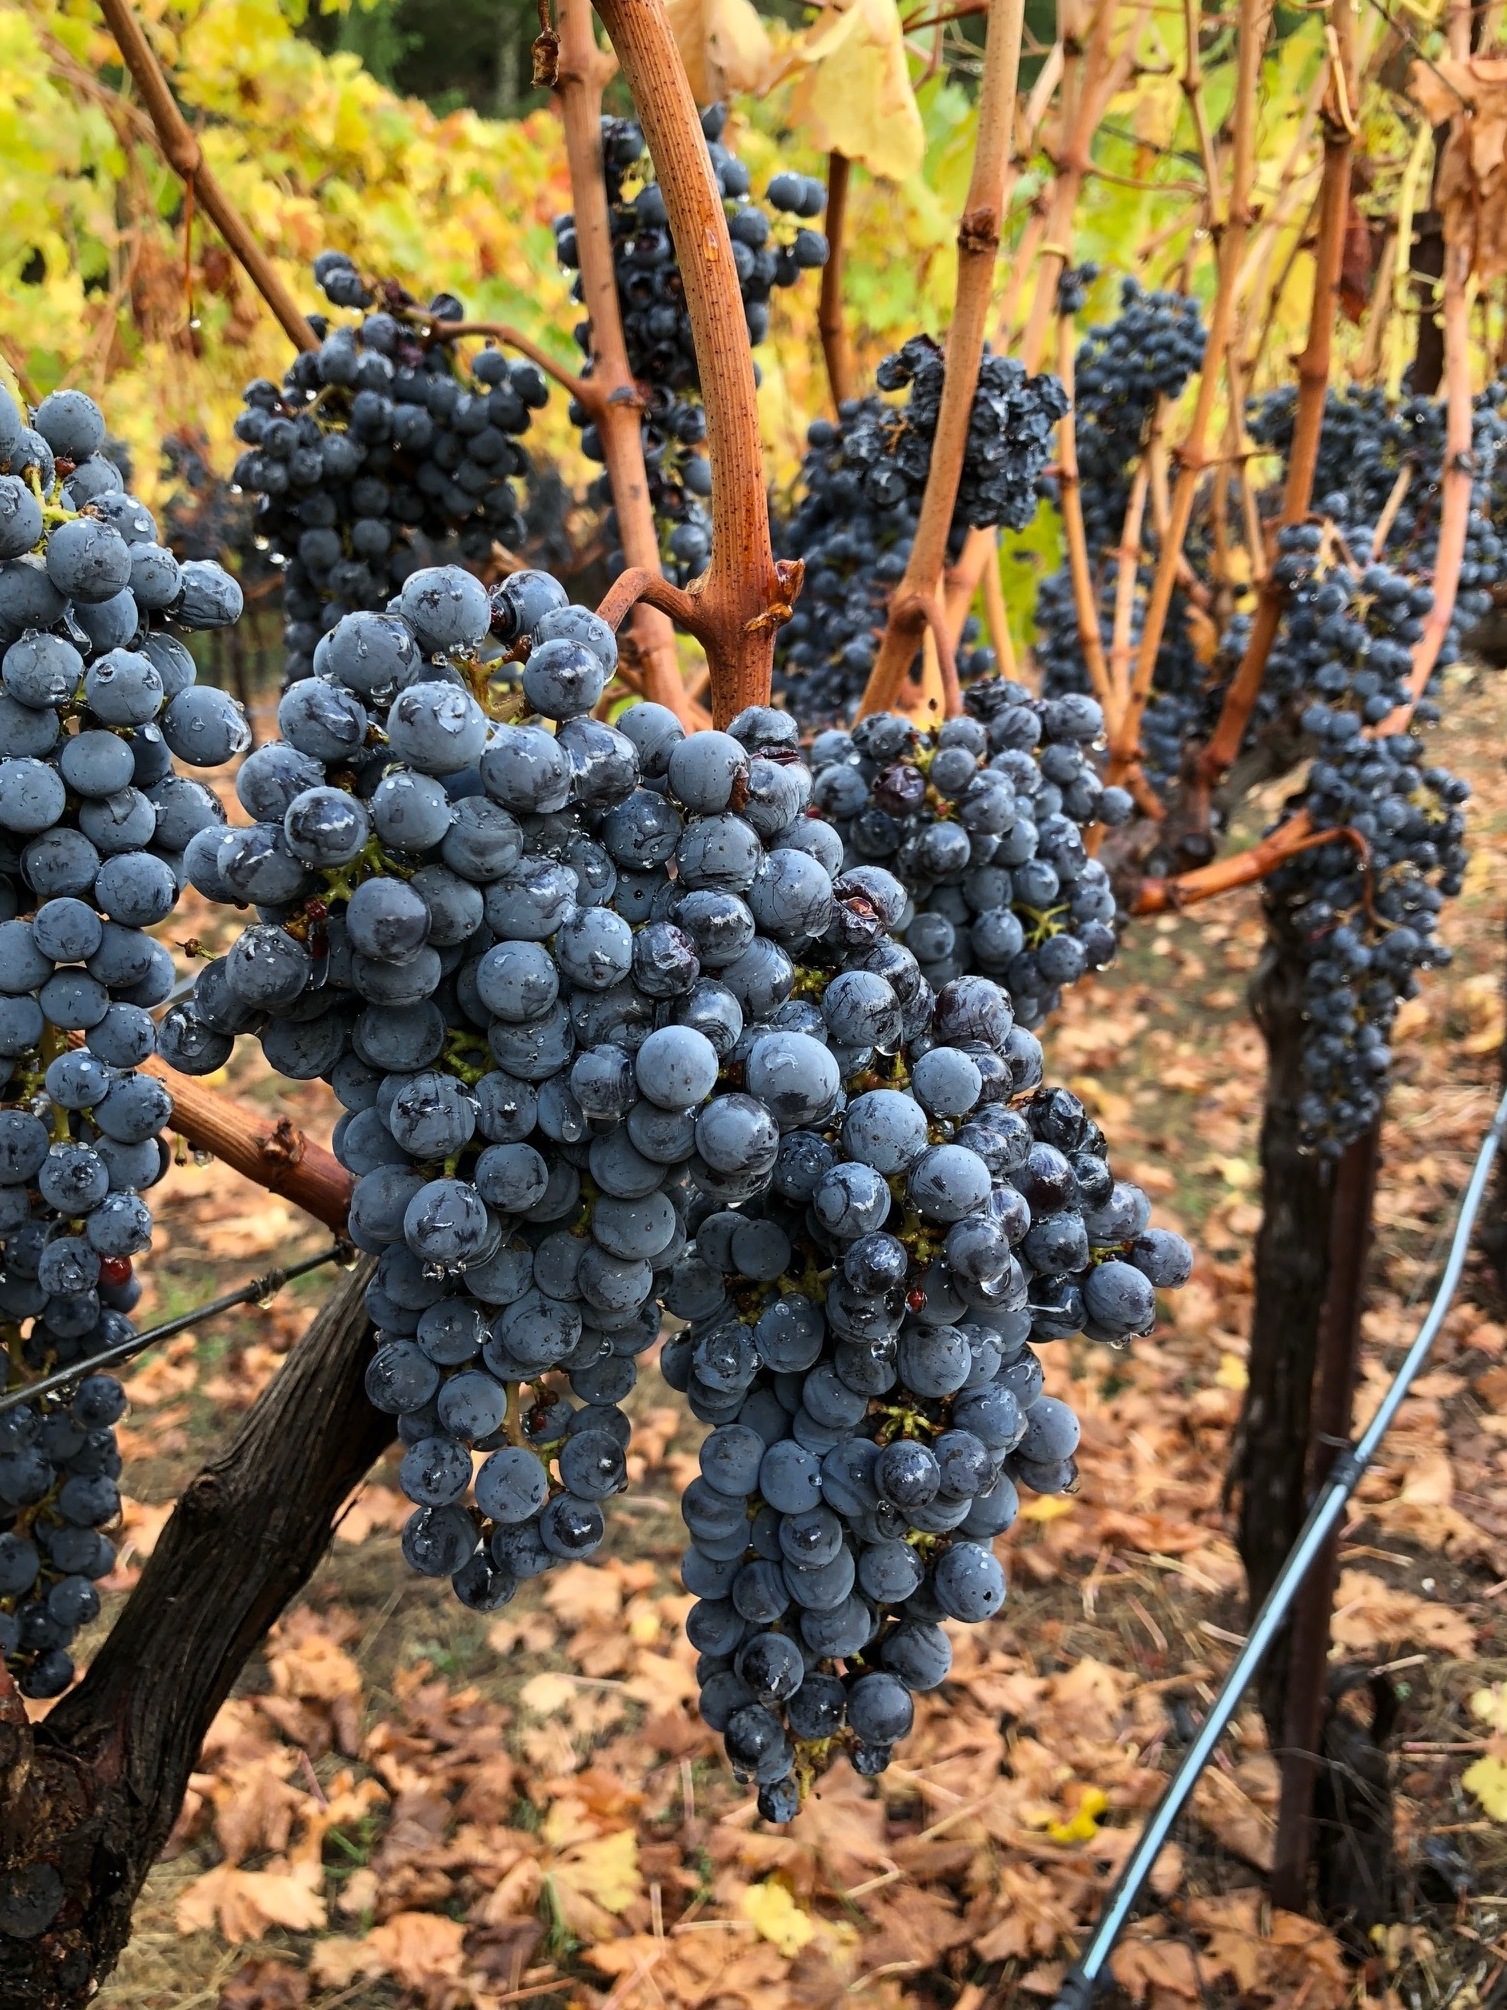 These grapes, tainted by smoke from the wildfires that burned through California's wine country last year, were picked quickly and turned into Rescue RayZins instead of being thrown away.